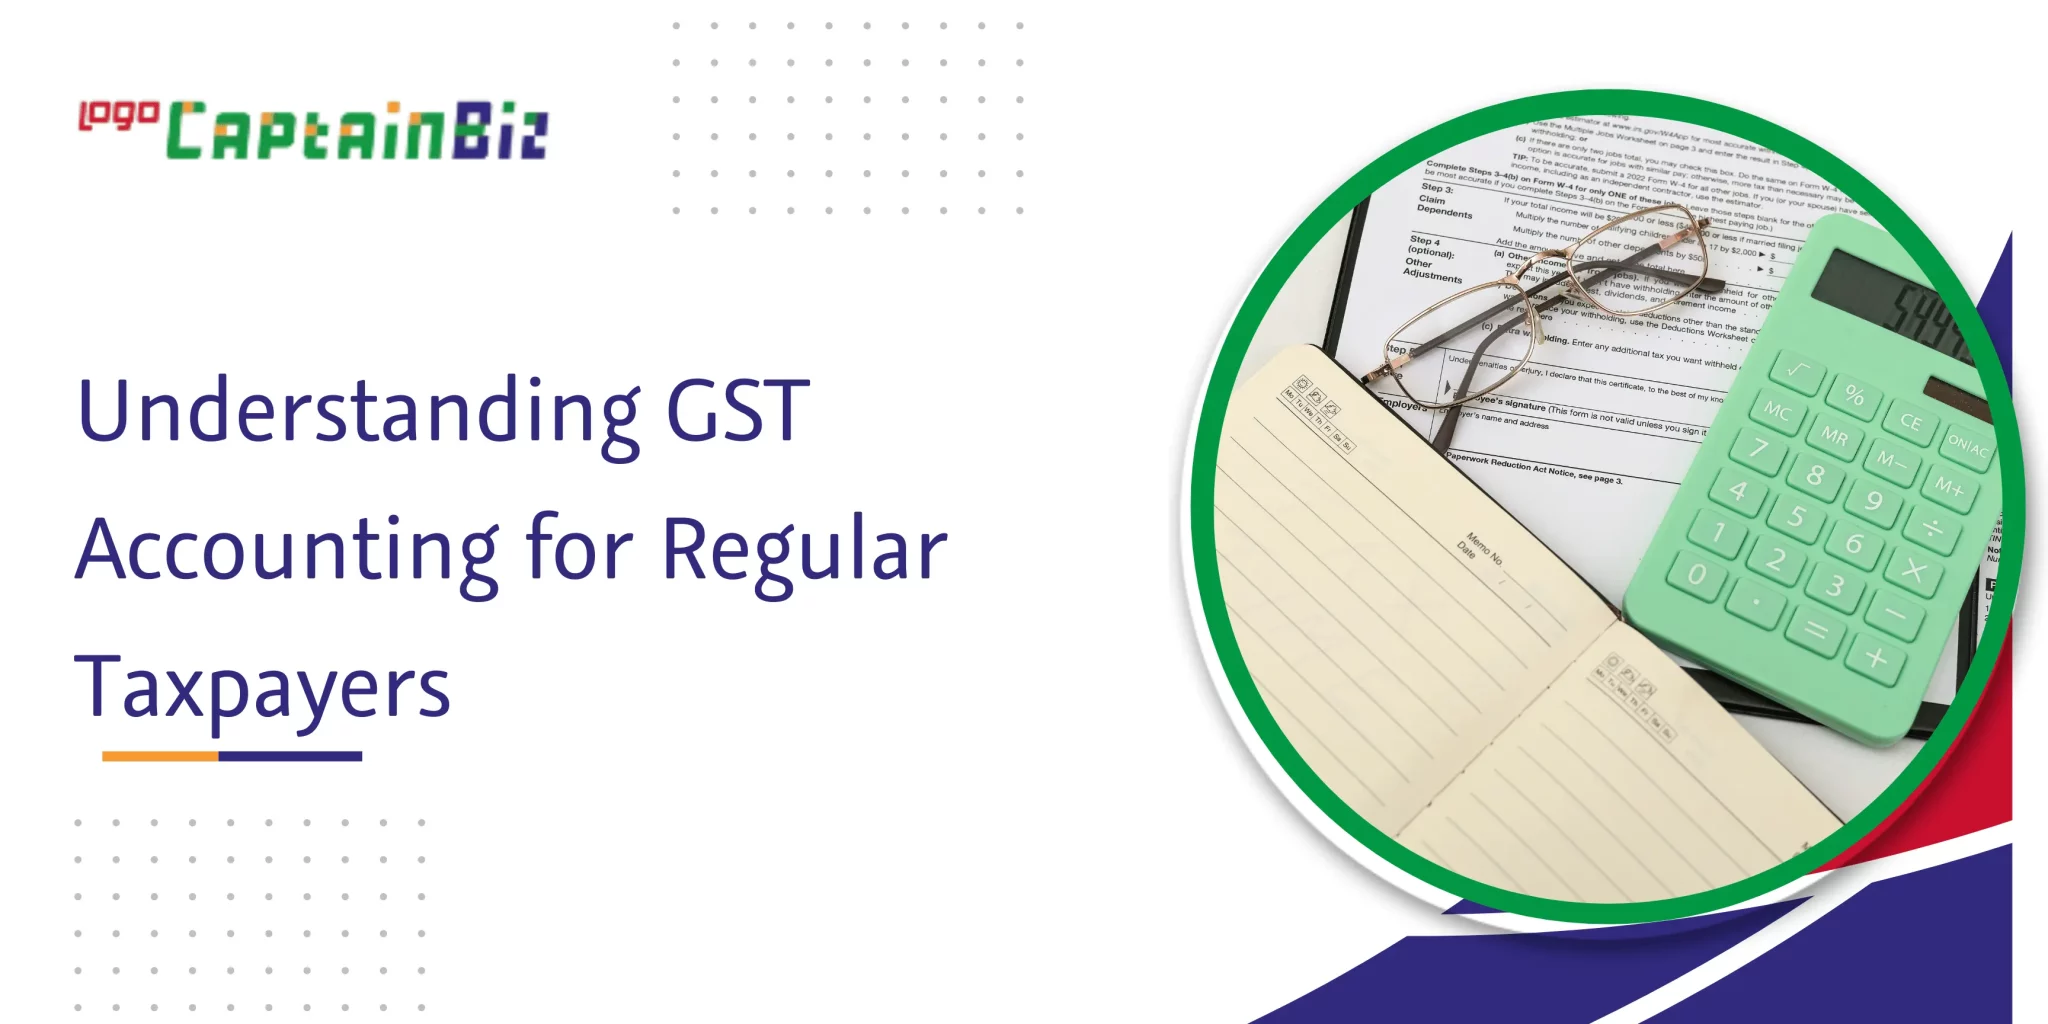 captainbiz understanding gst accounting for regular taxpayers